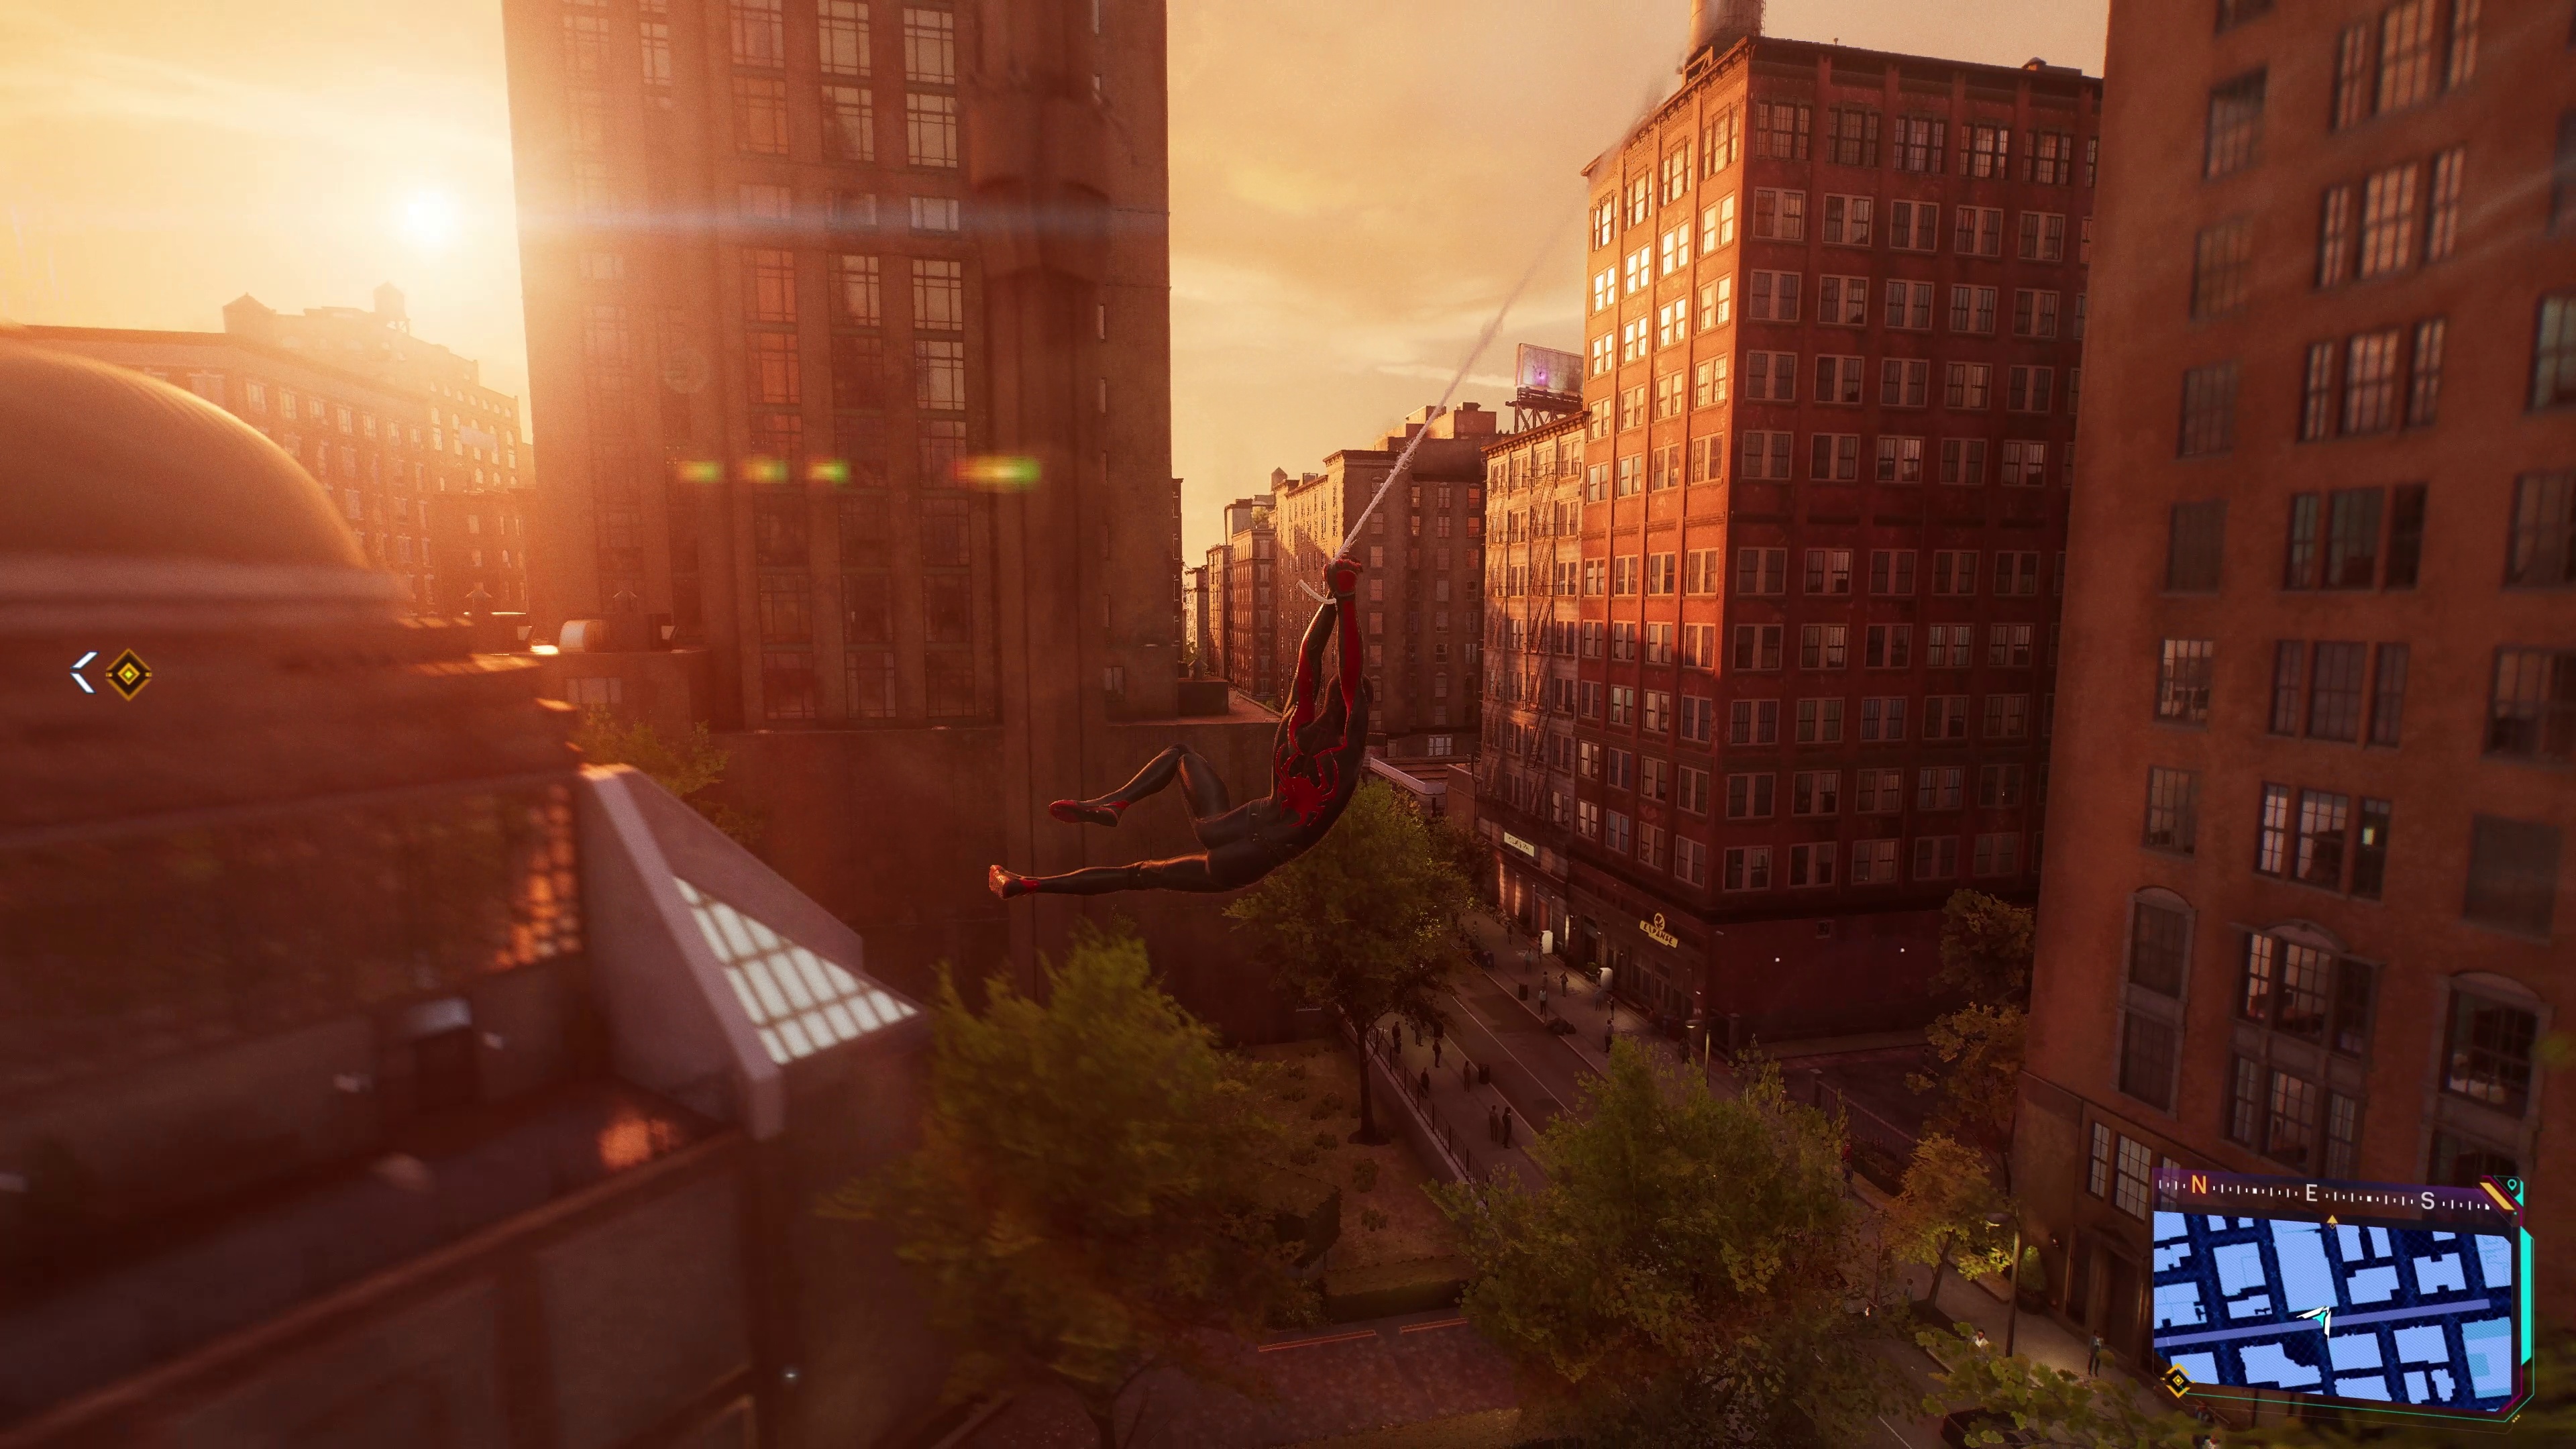 (Swinging is simply fun. Especially when New York is showing its beautiful side.)